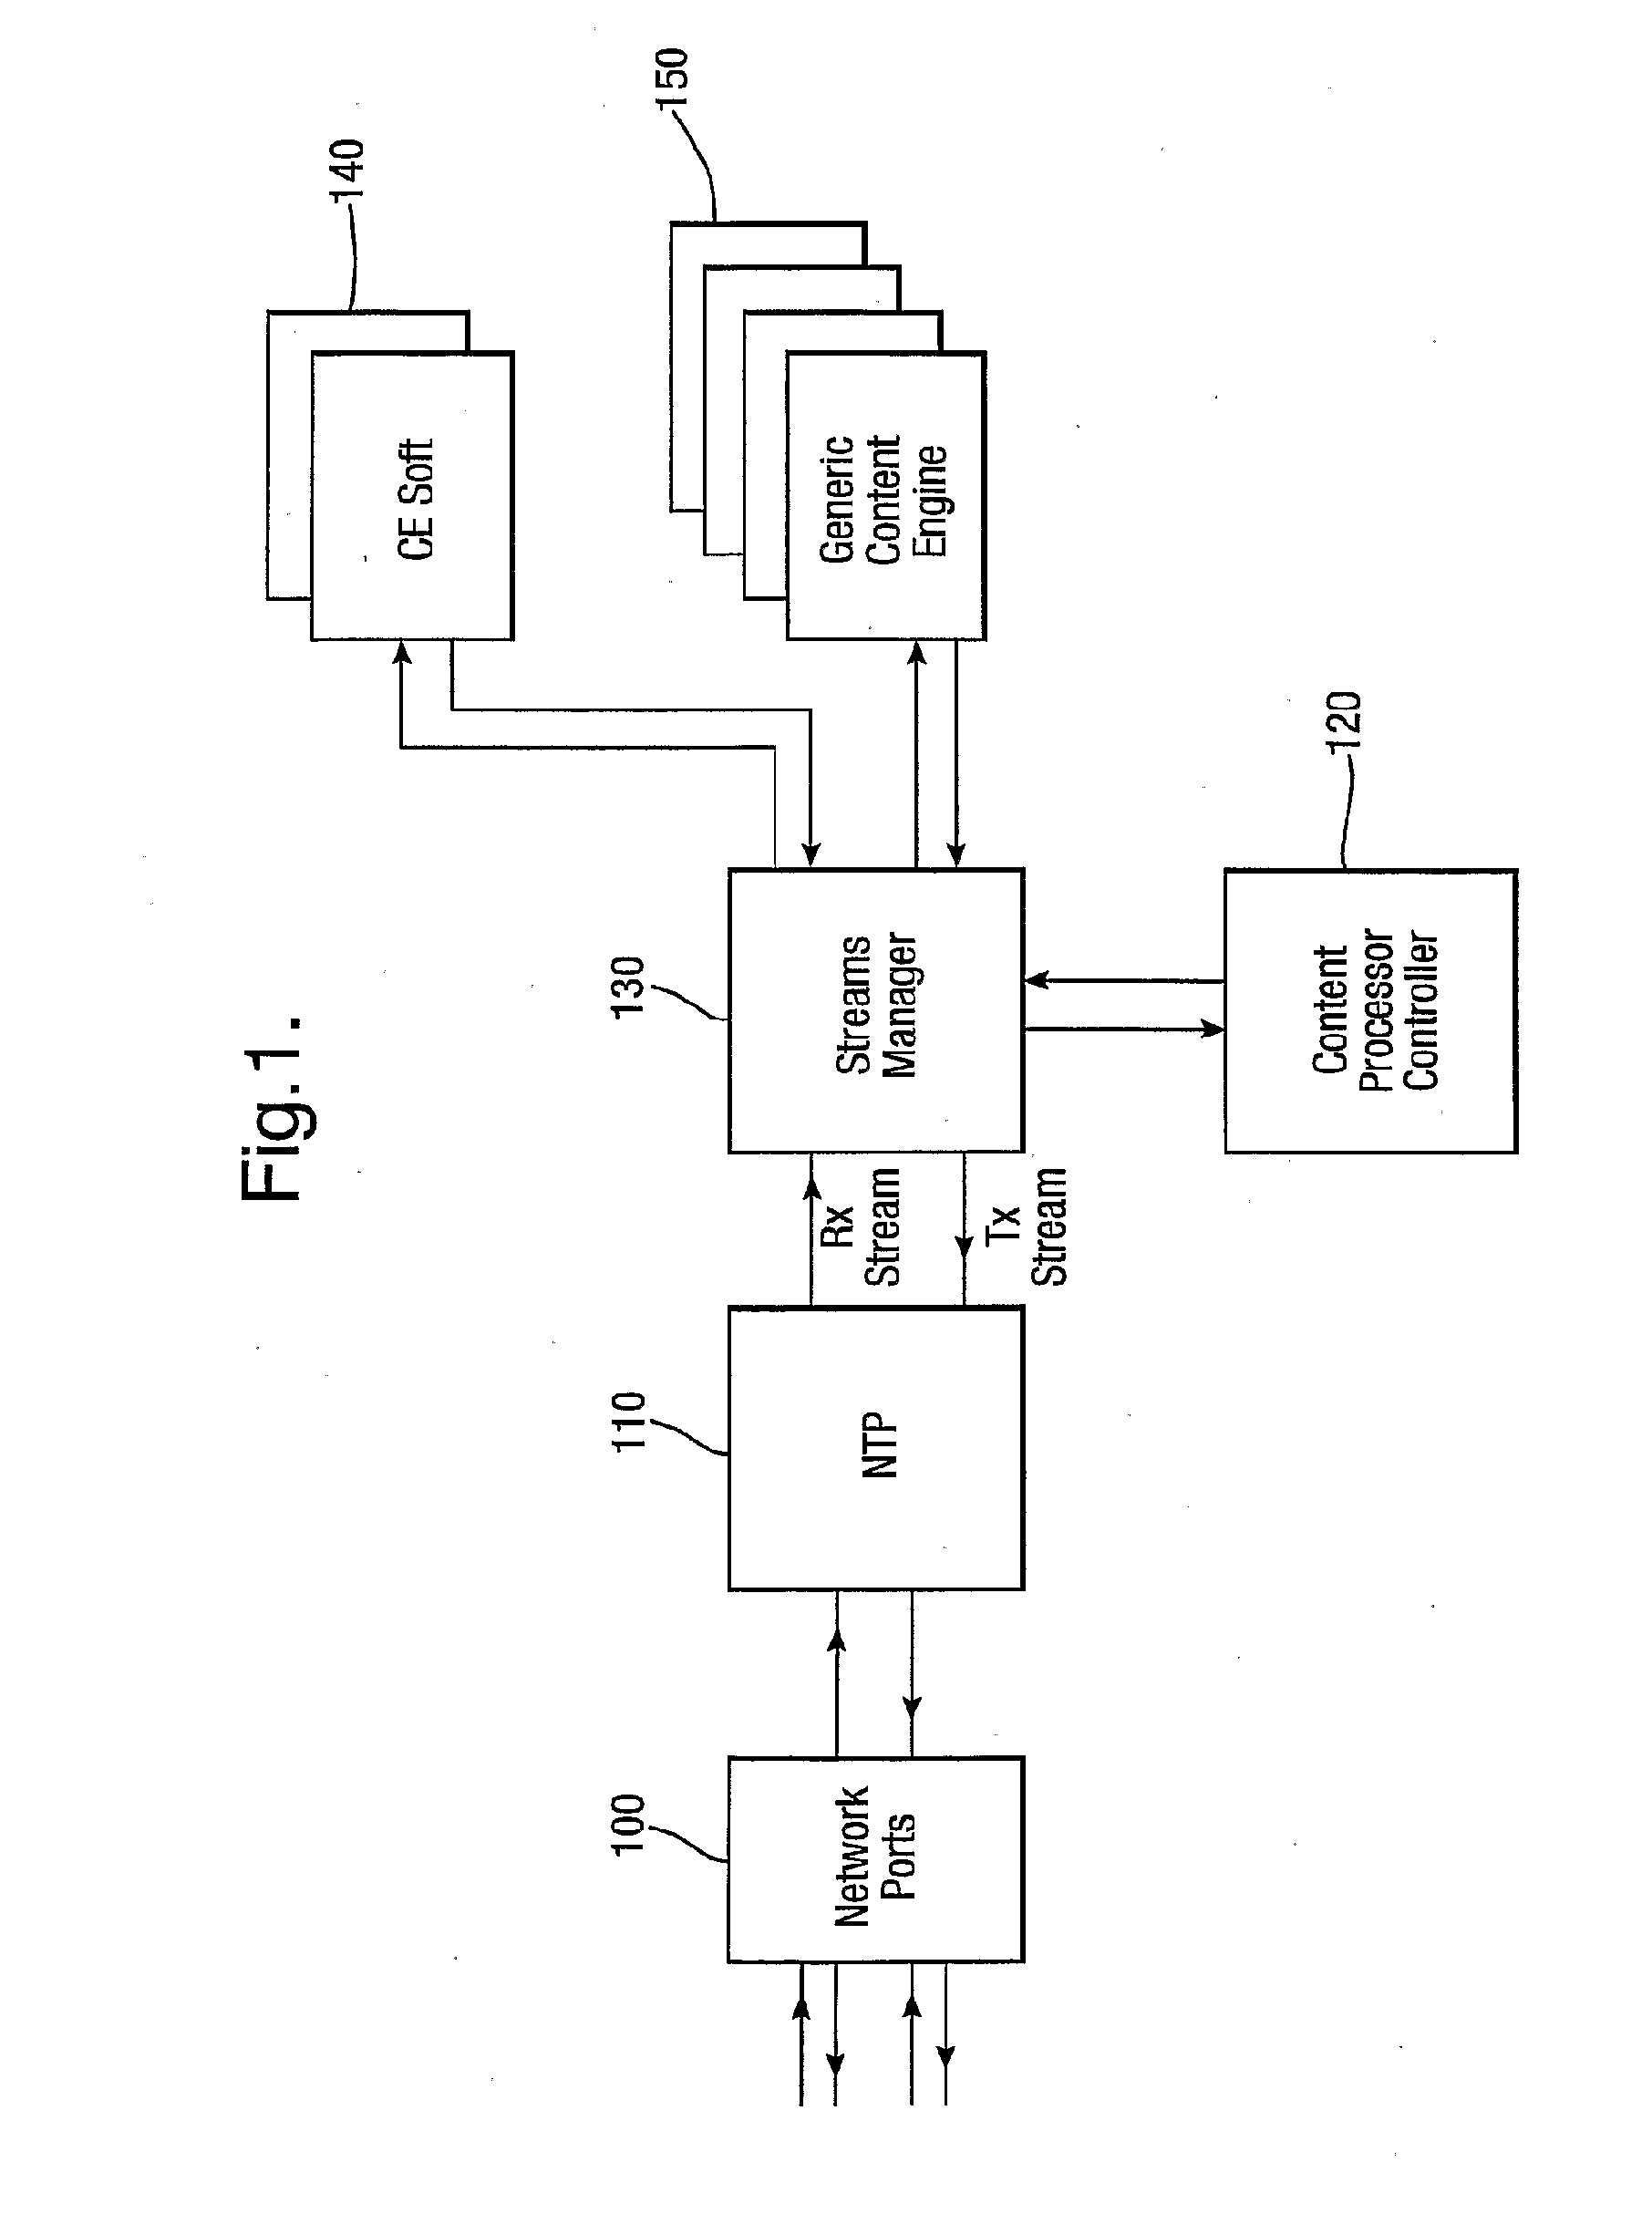 Method and apparatus for providing network security by scanning for viruses